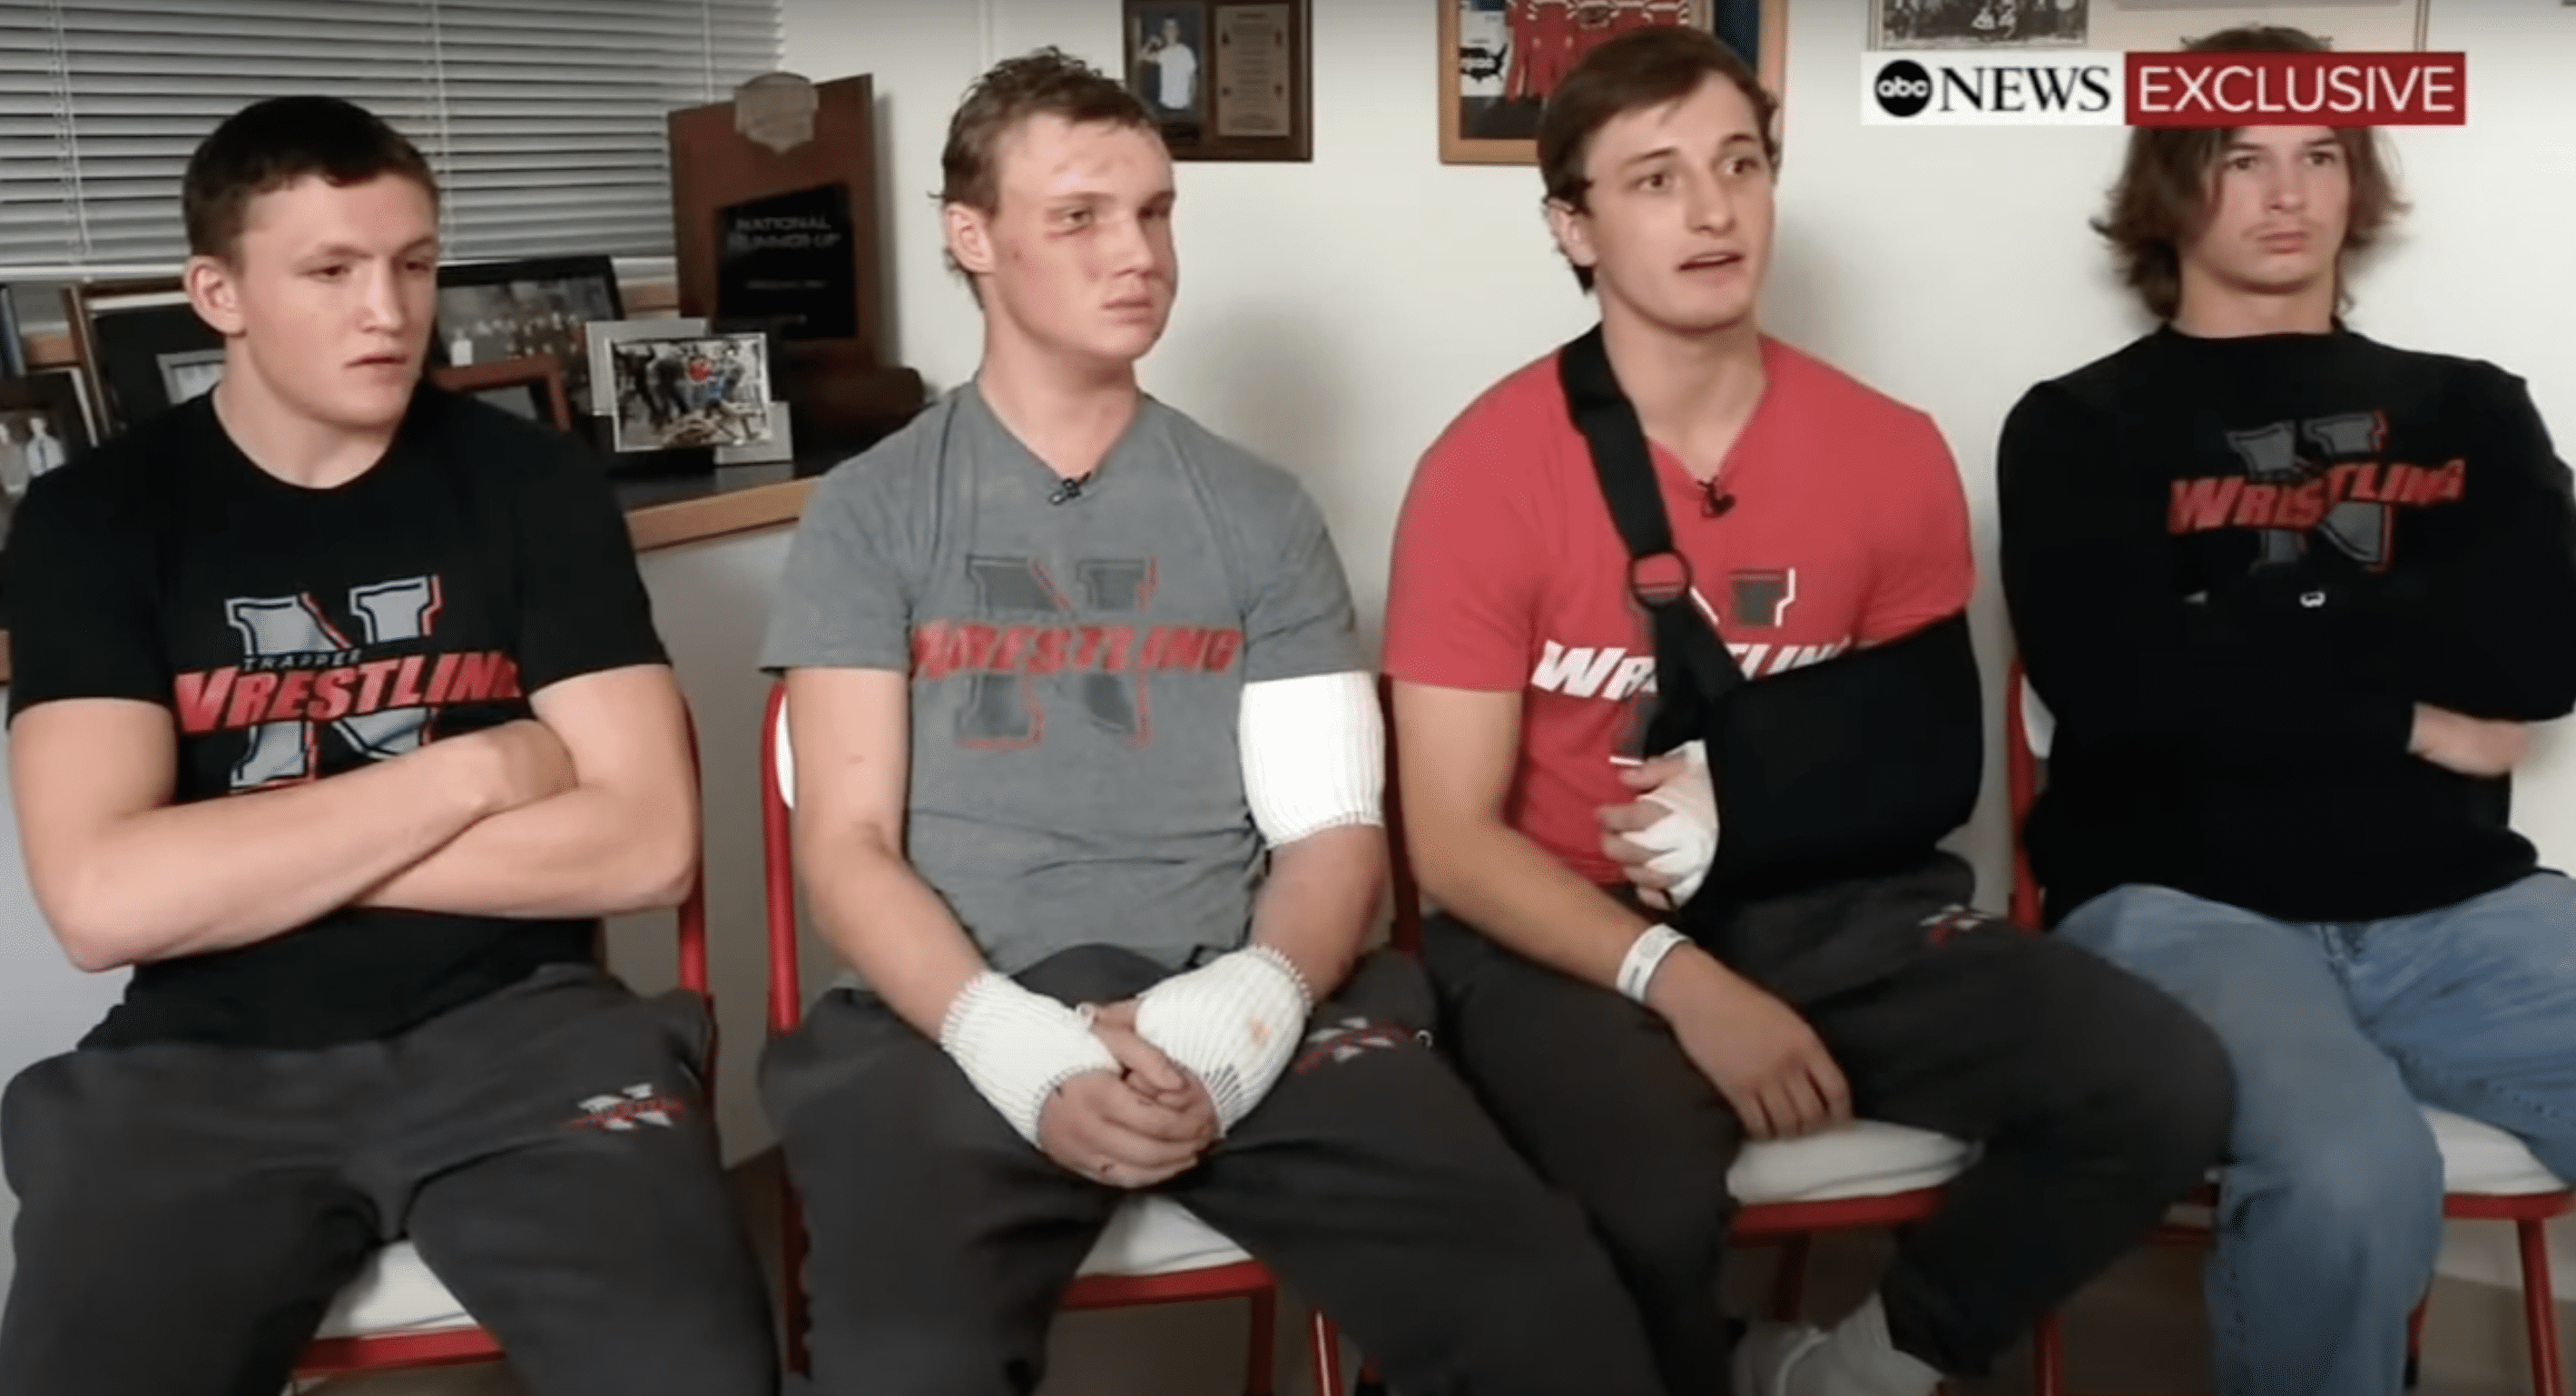 The four Northwest College Wrestling Team members, including Kendell Cummings and Brady Lowry. | Source: YouTube.com/ABC 7 Chicago